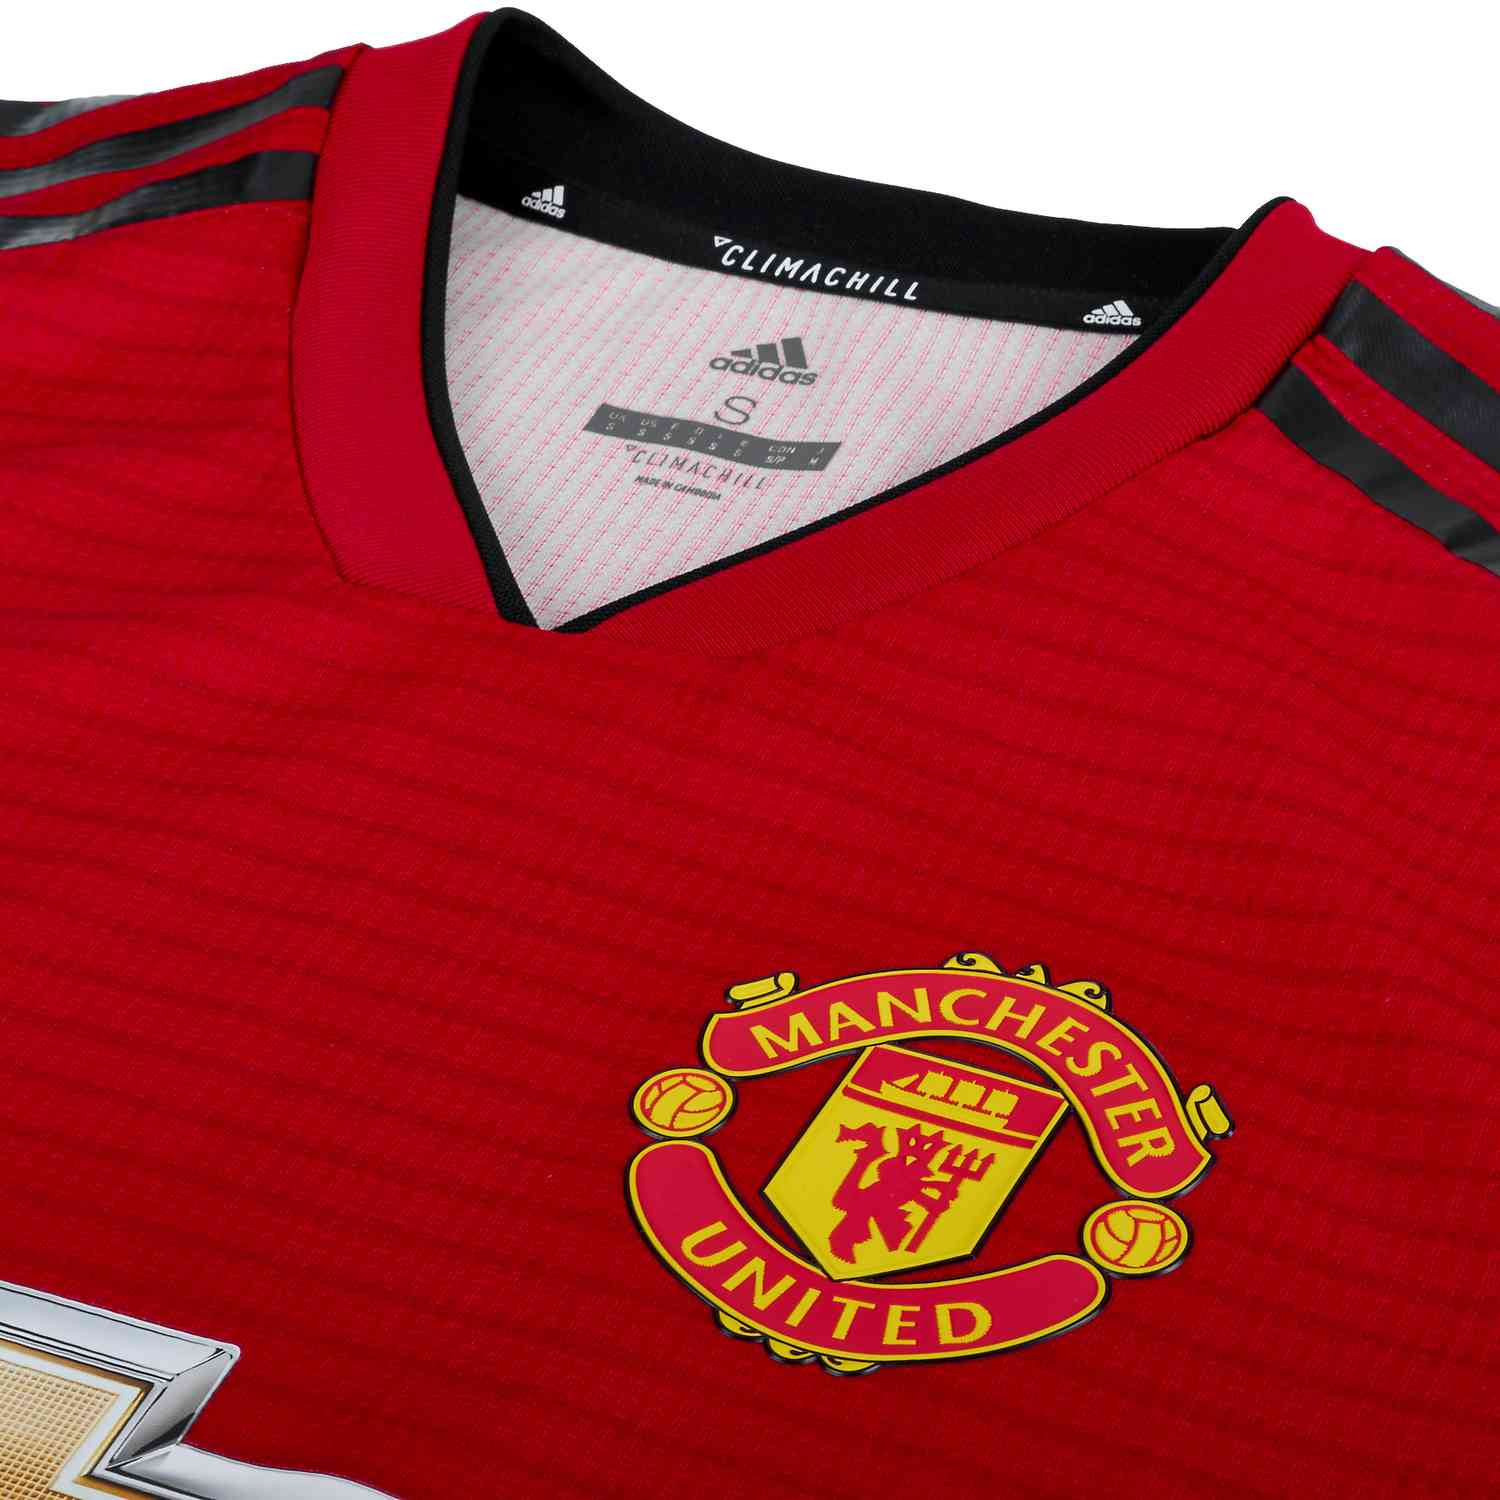 man united official jersey